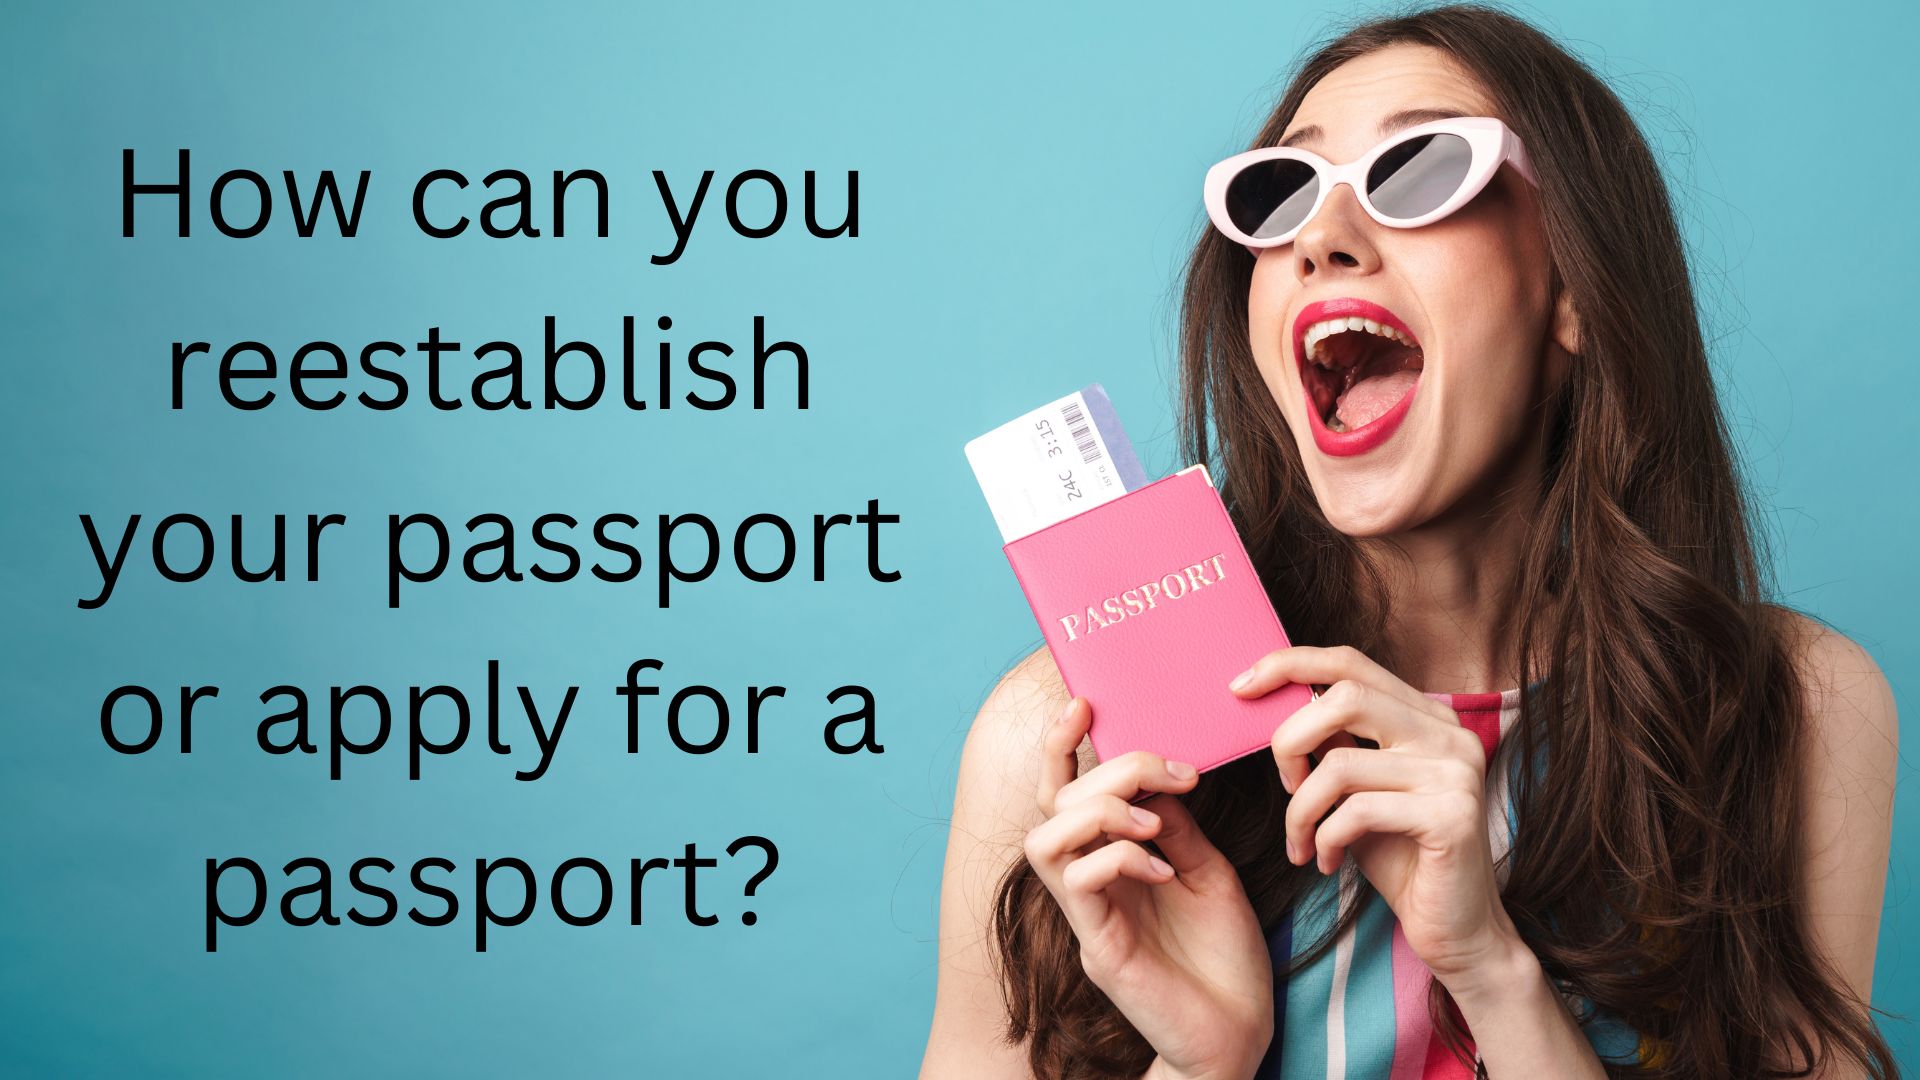 How can you reestablish your passport or apply for a passport